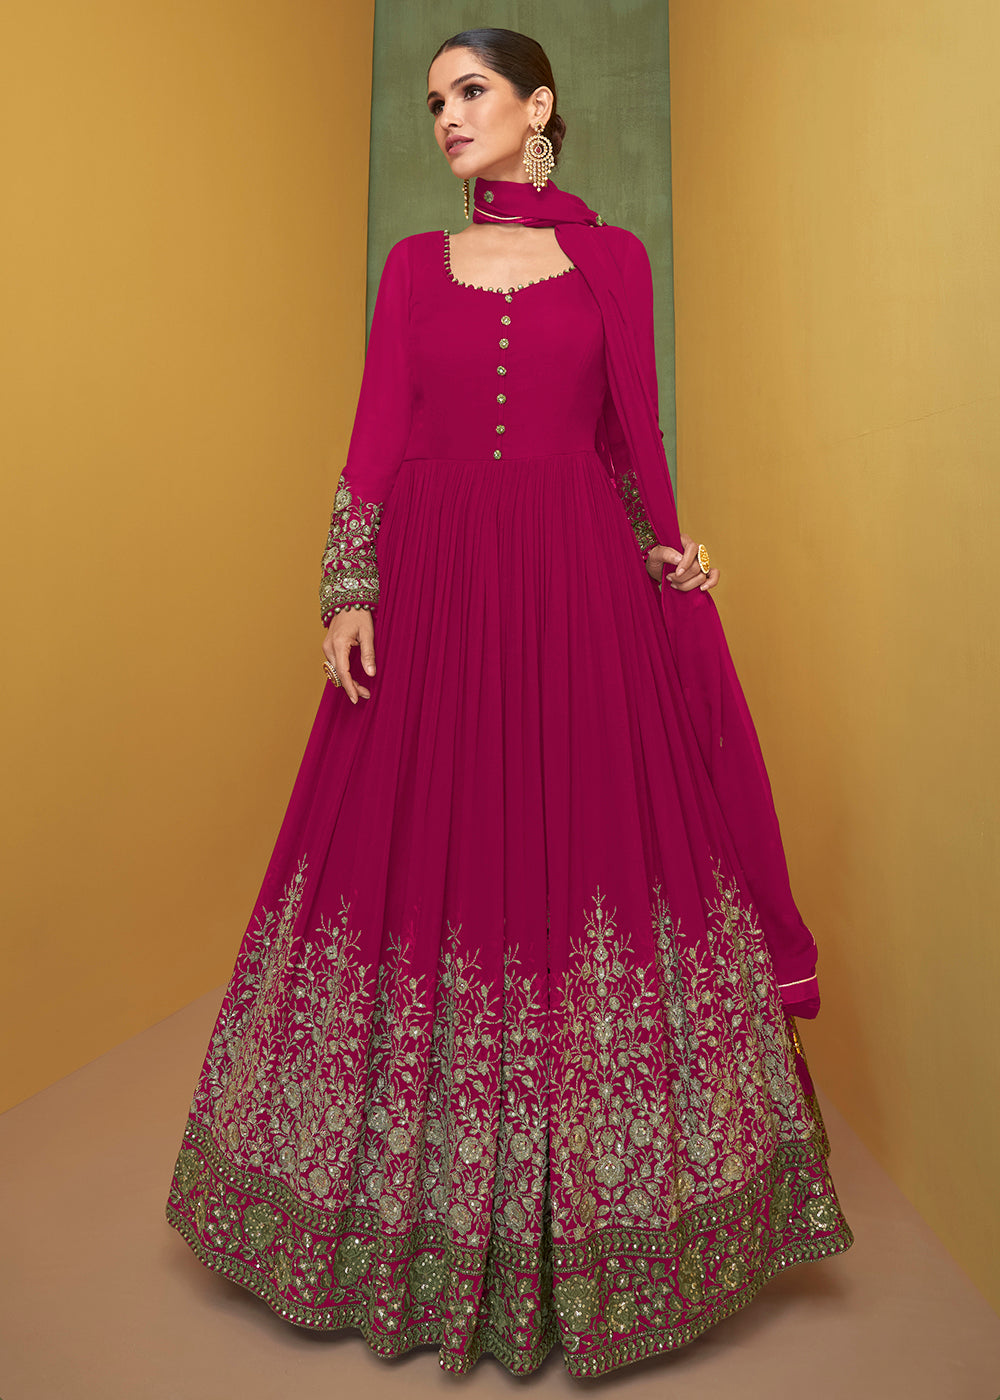 Buy Now Appealing Hot Pink Wedding Embroidered Bridal Anarkali Gown Online in USA, UK, Australia, New Zealand, Canada & Worldwide at Empress Clothing. 